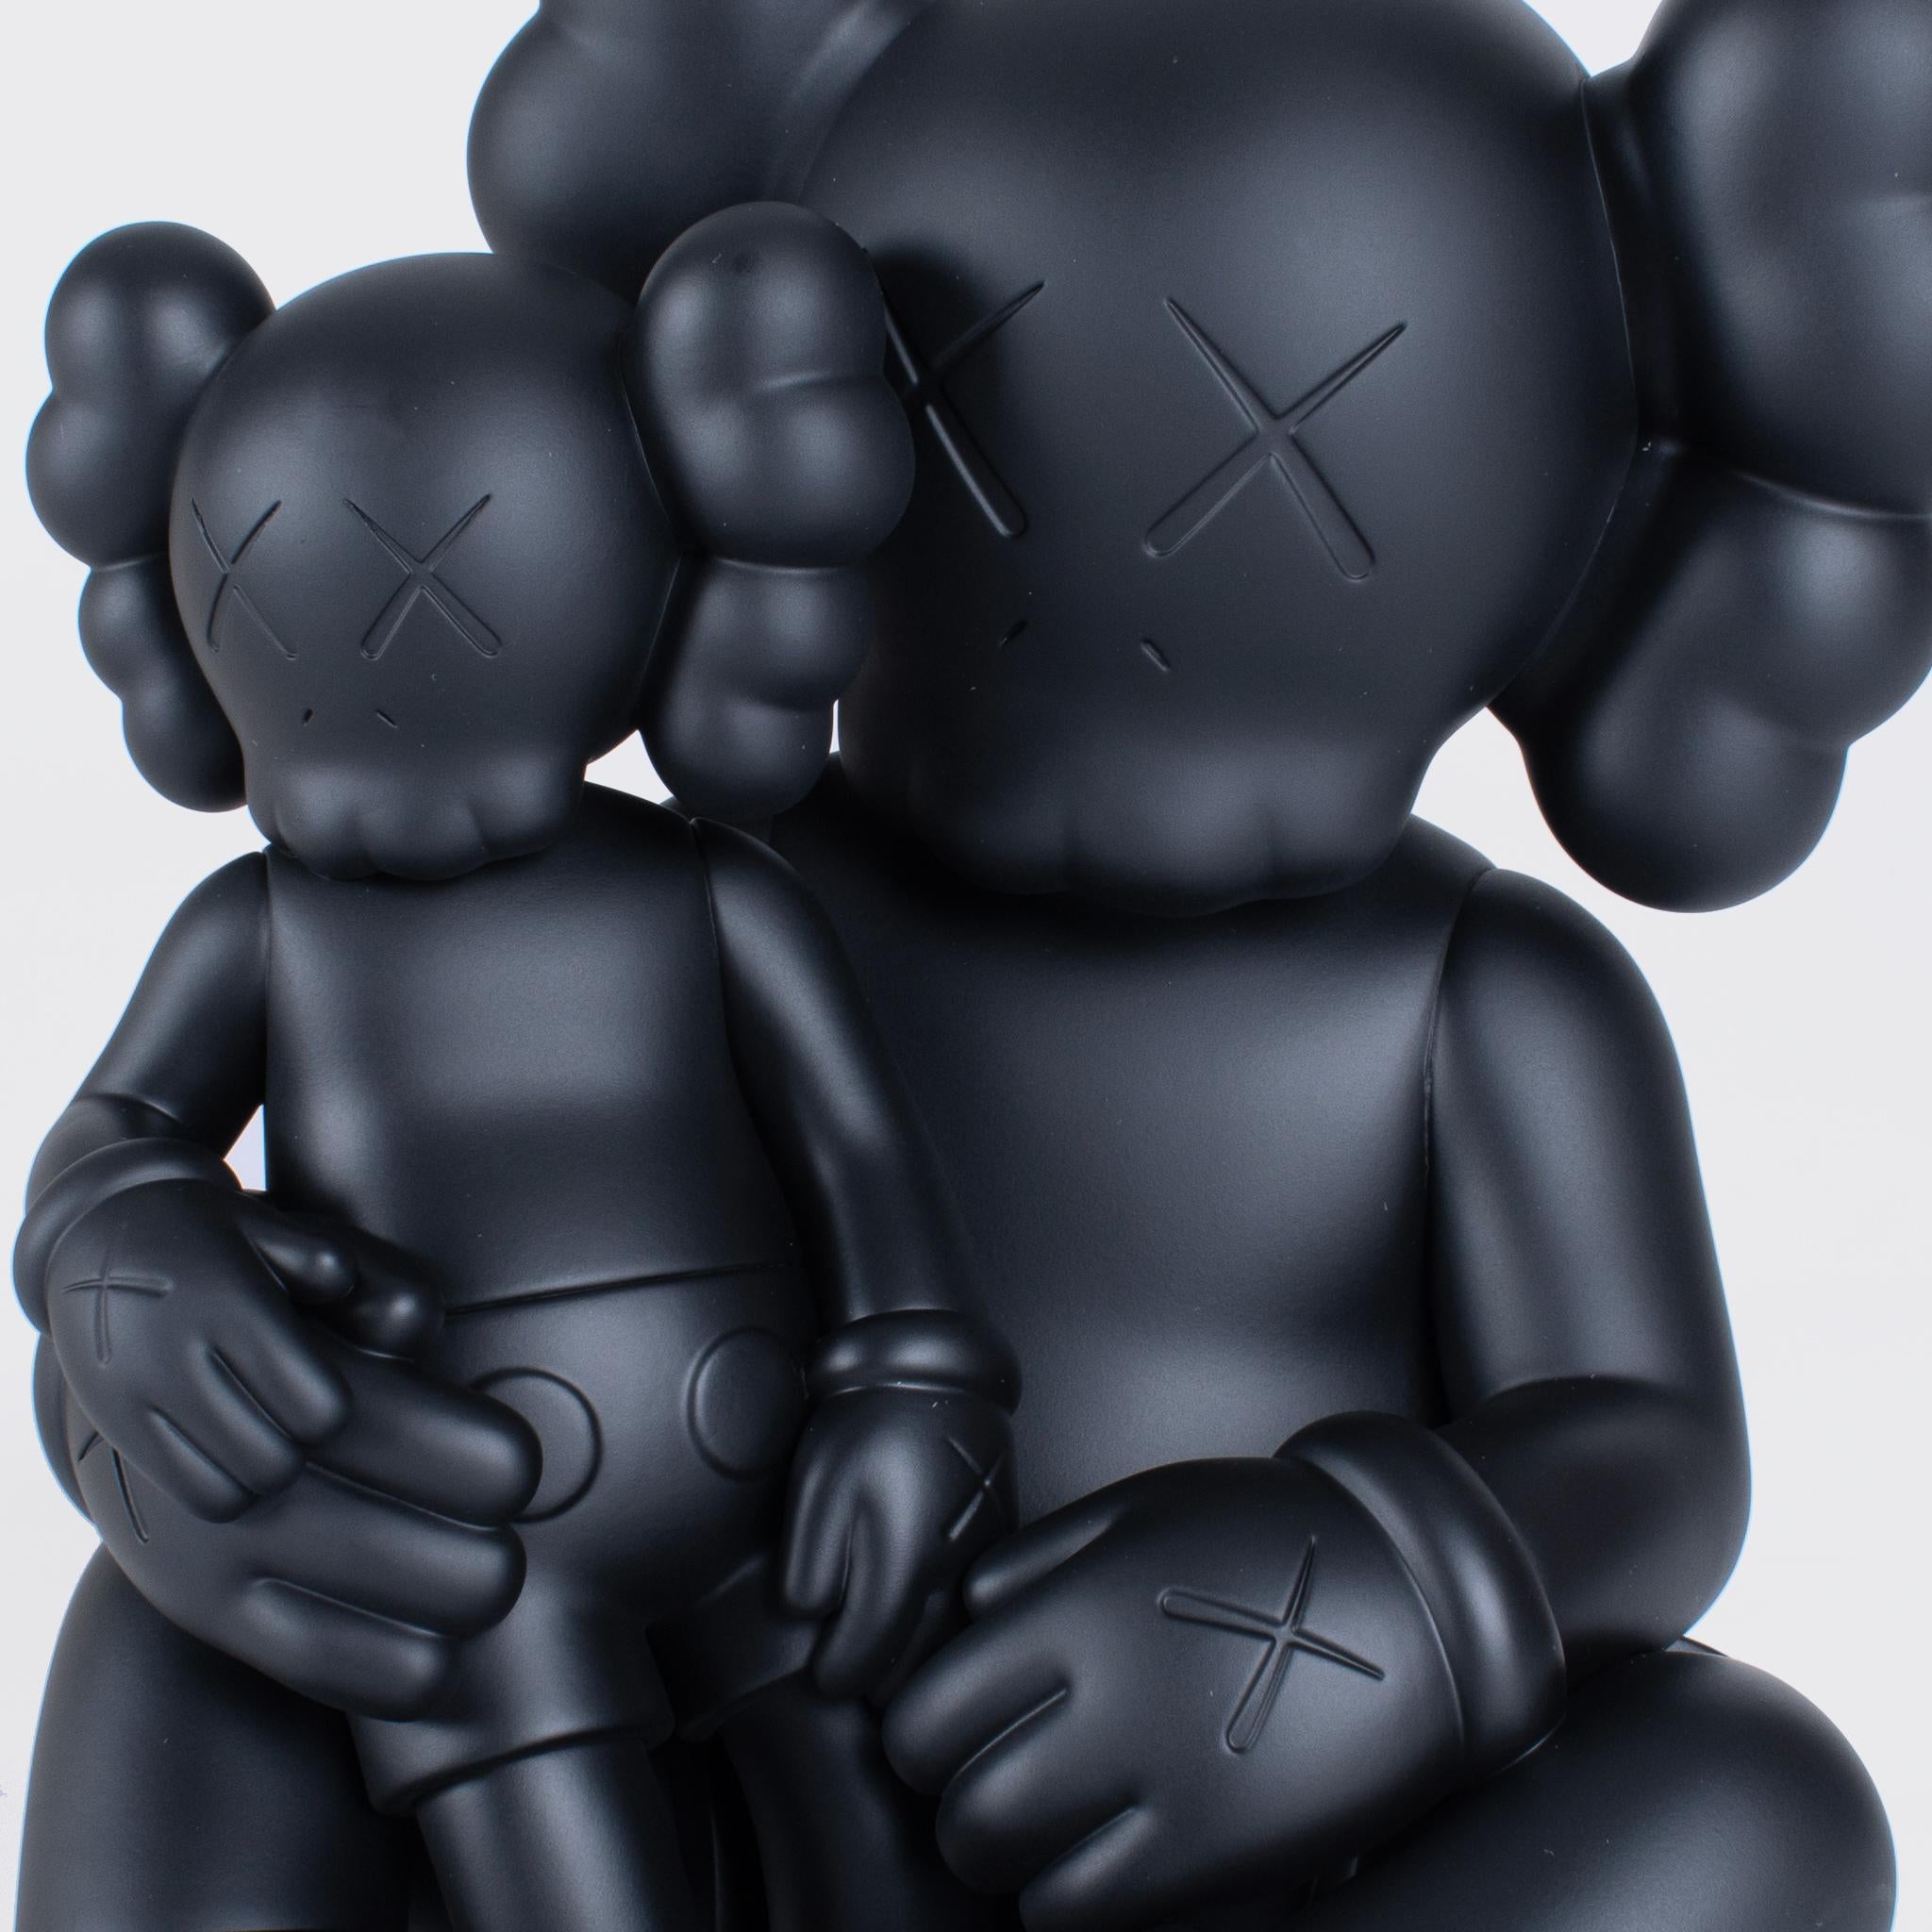 Holiday Changbai Mountain Figure (Black, Brown, Snowy White) - Contemporary Sculpture by KAWS